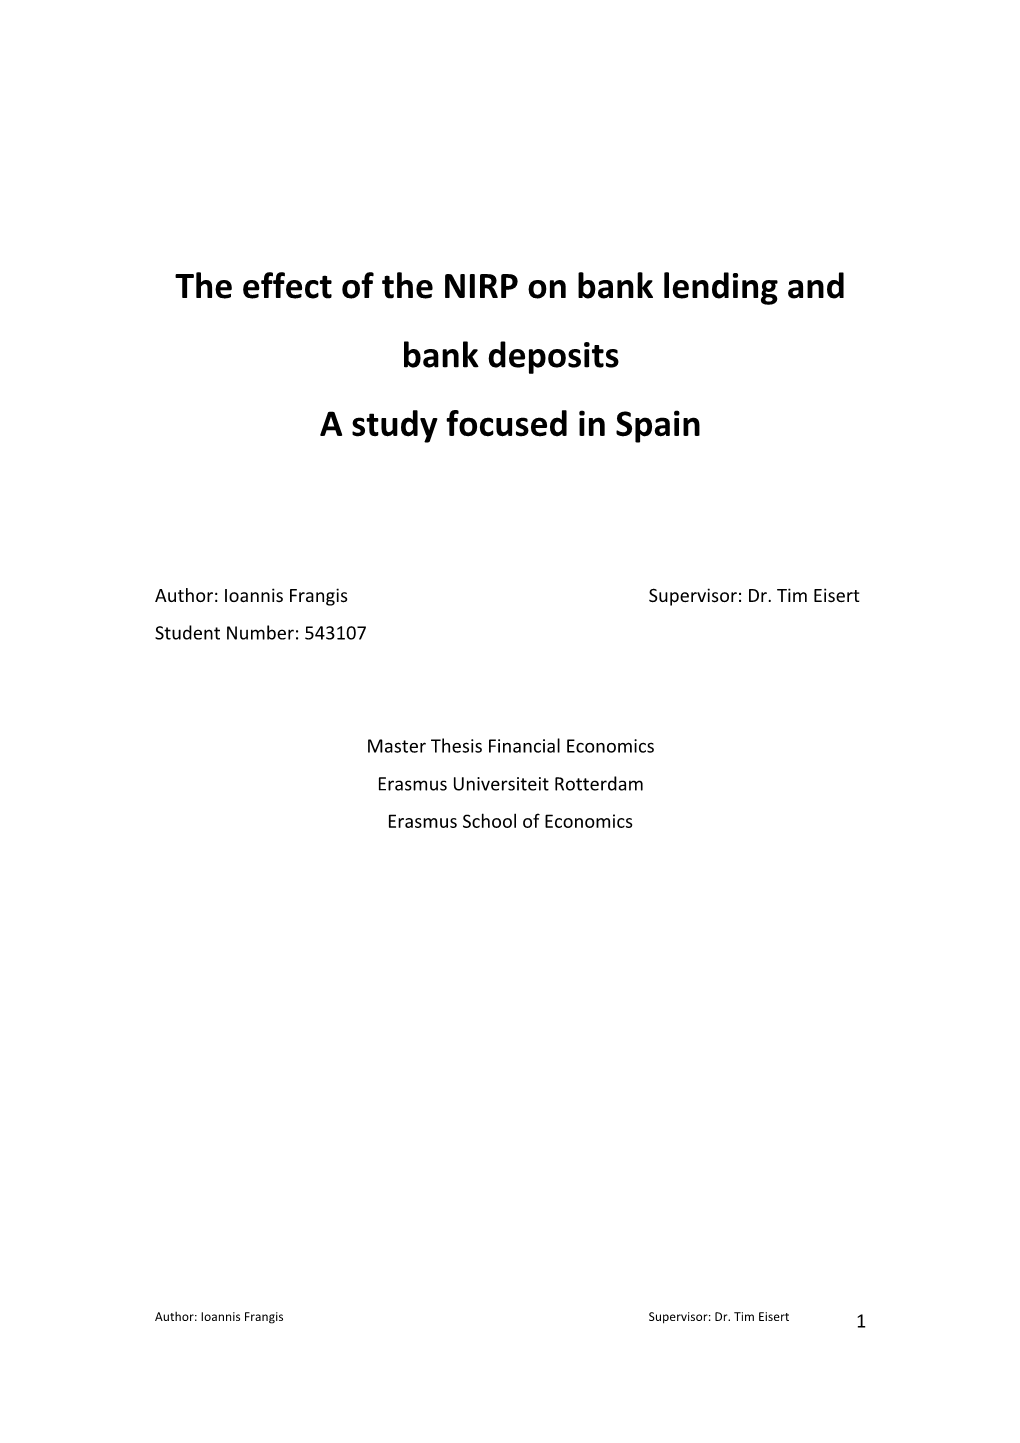 The Effect of the NIRP on Bank Lending and Bank Deposits a Study Focused in Spain